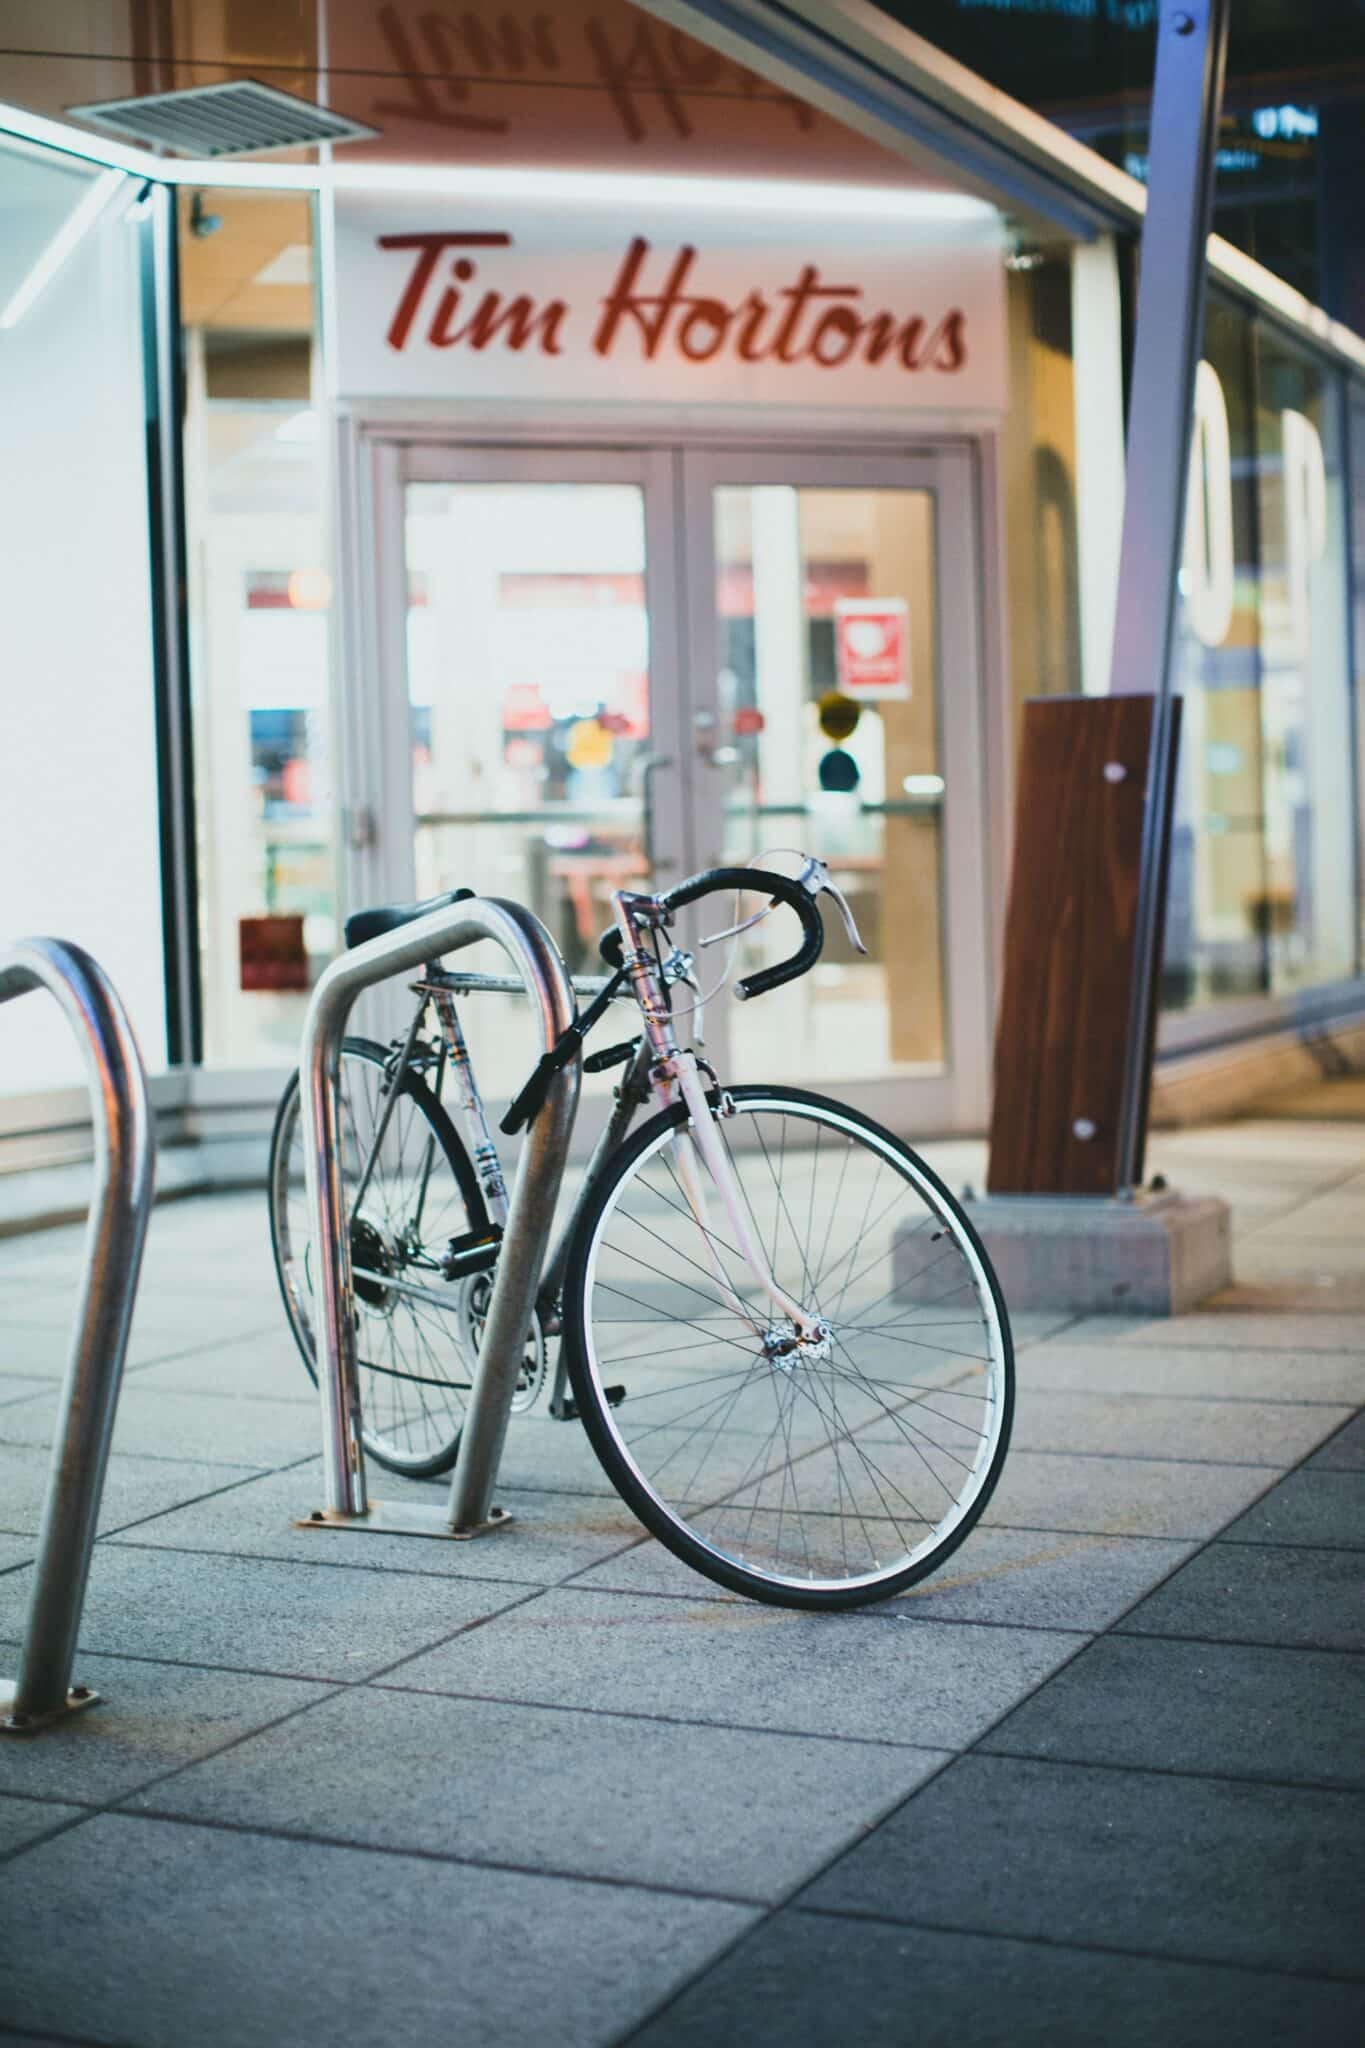 A bicycle locked to bike stand in front of a Tim Horton's.